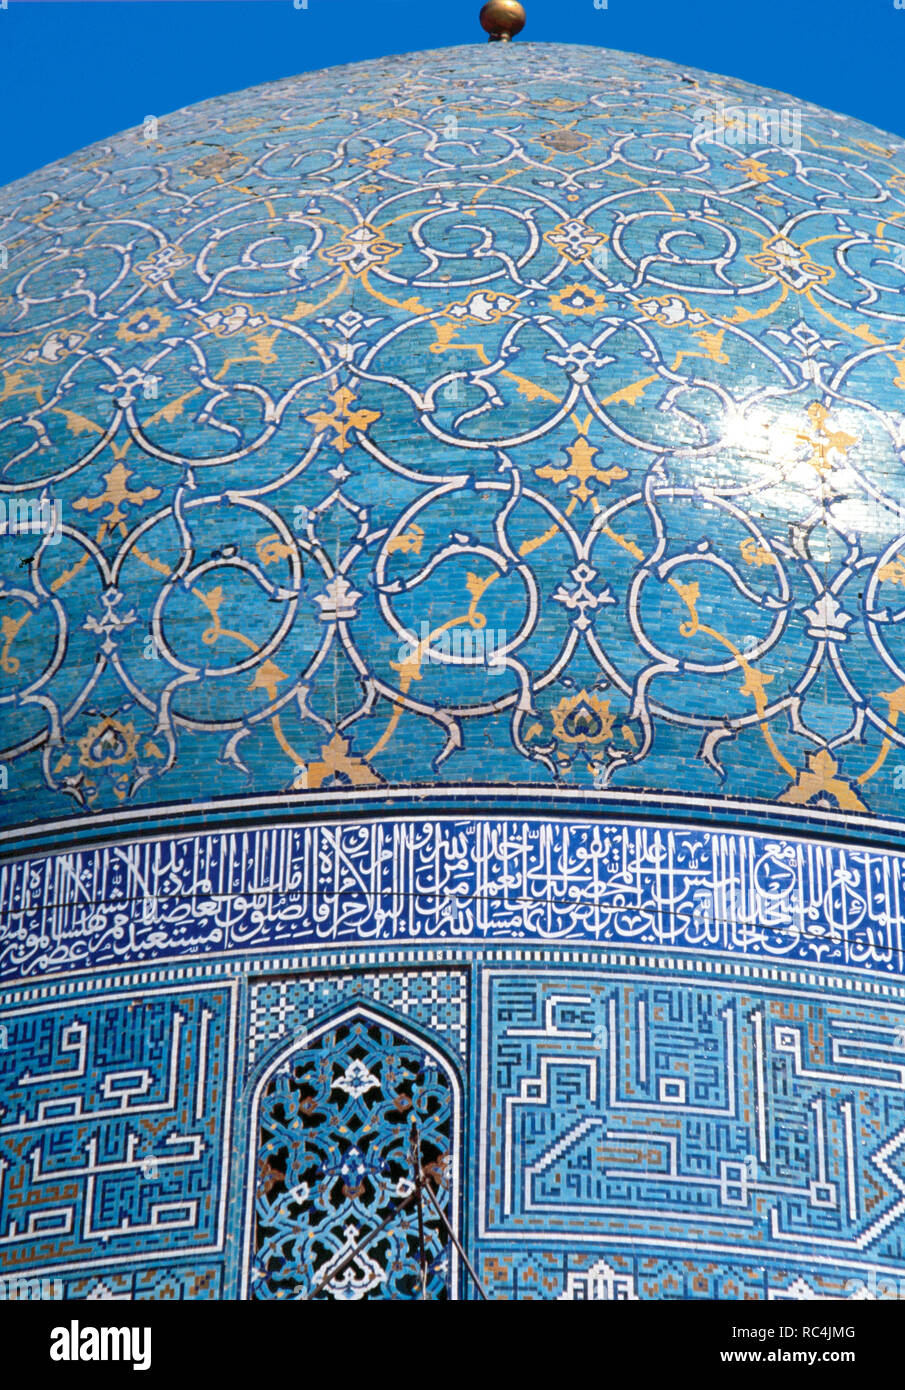 Islamic Art. Safavid period. 17th century. Imam Mosque or Great Mosque (Masjed-e-Imam). Built between 1612-1638 during the reign of Shah Abbas I (1587-1629). Detail of the great dome over the mihrab hall. Isfahan. Islamic Republic of Iran. Stock Photo